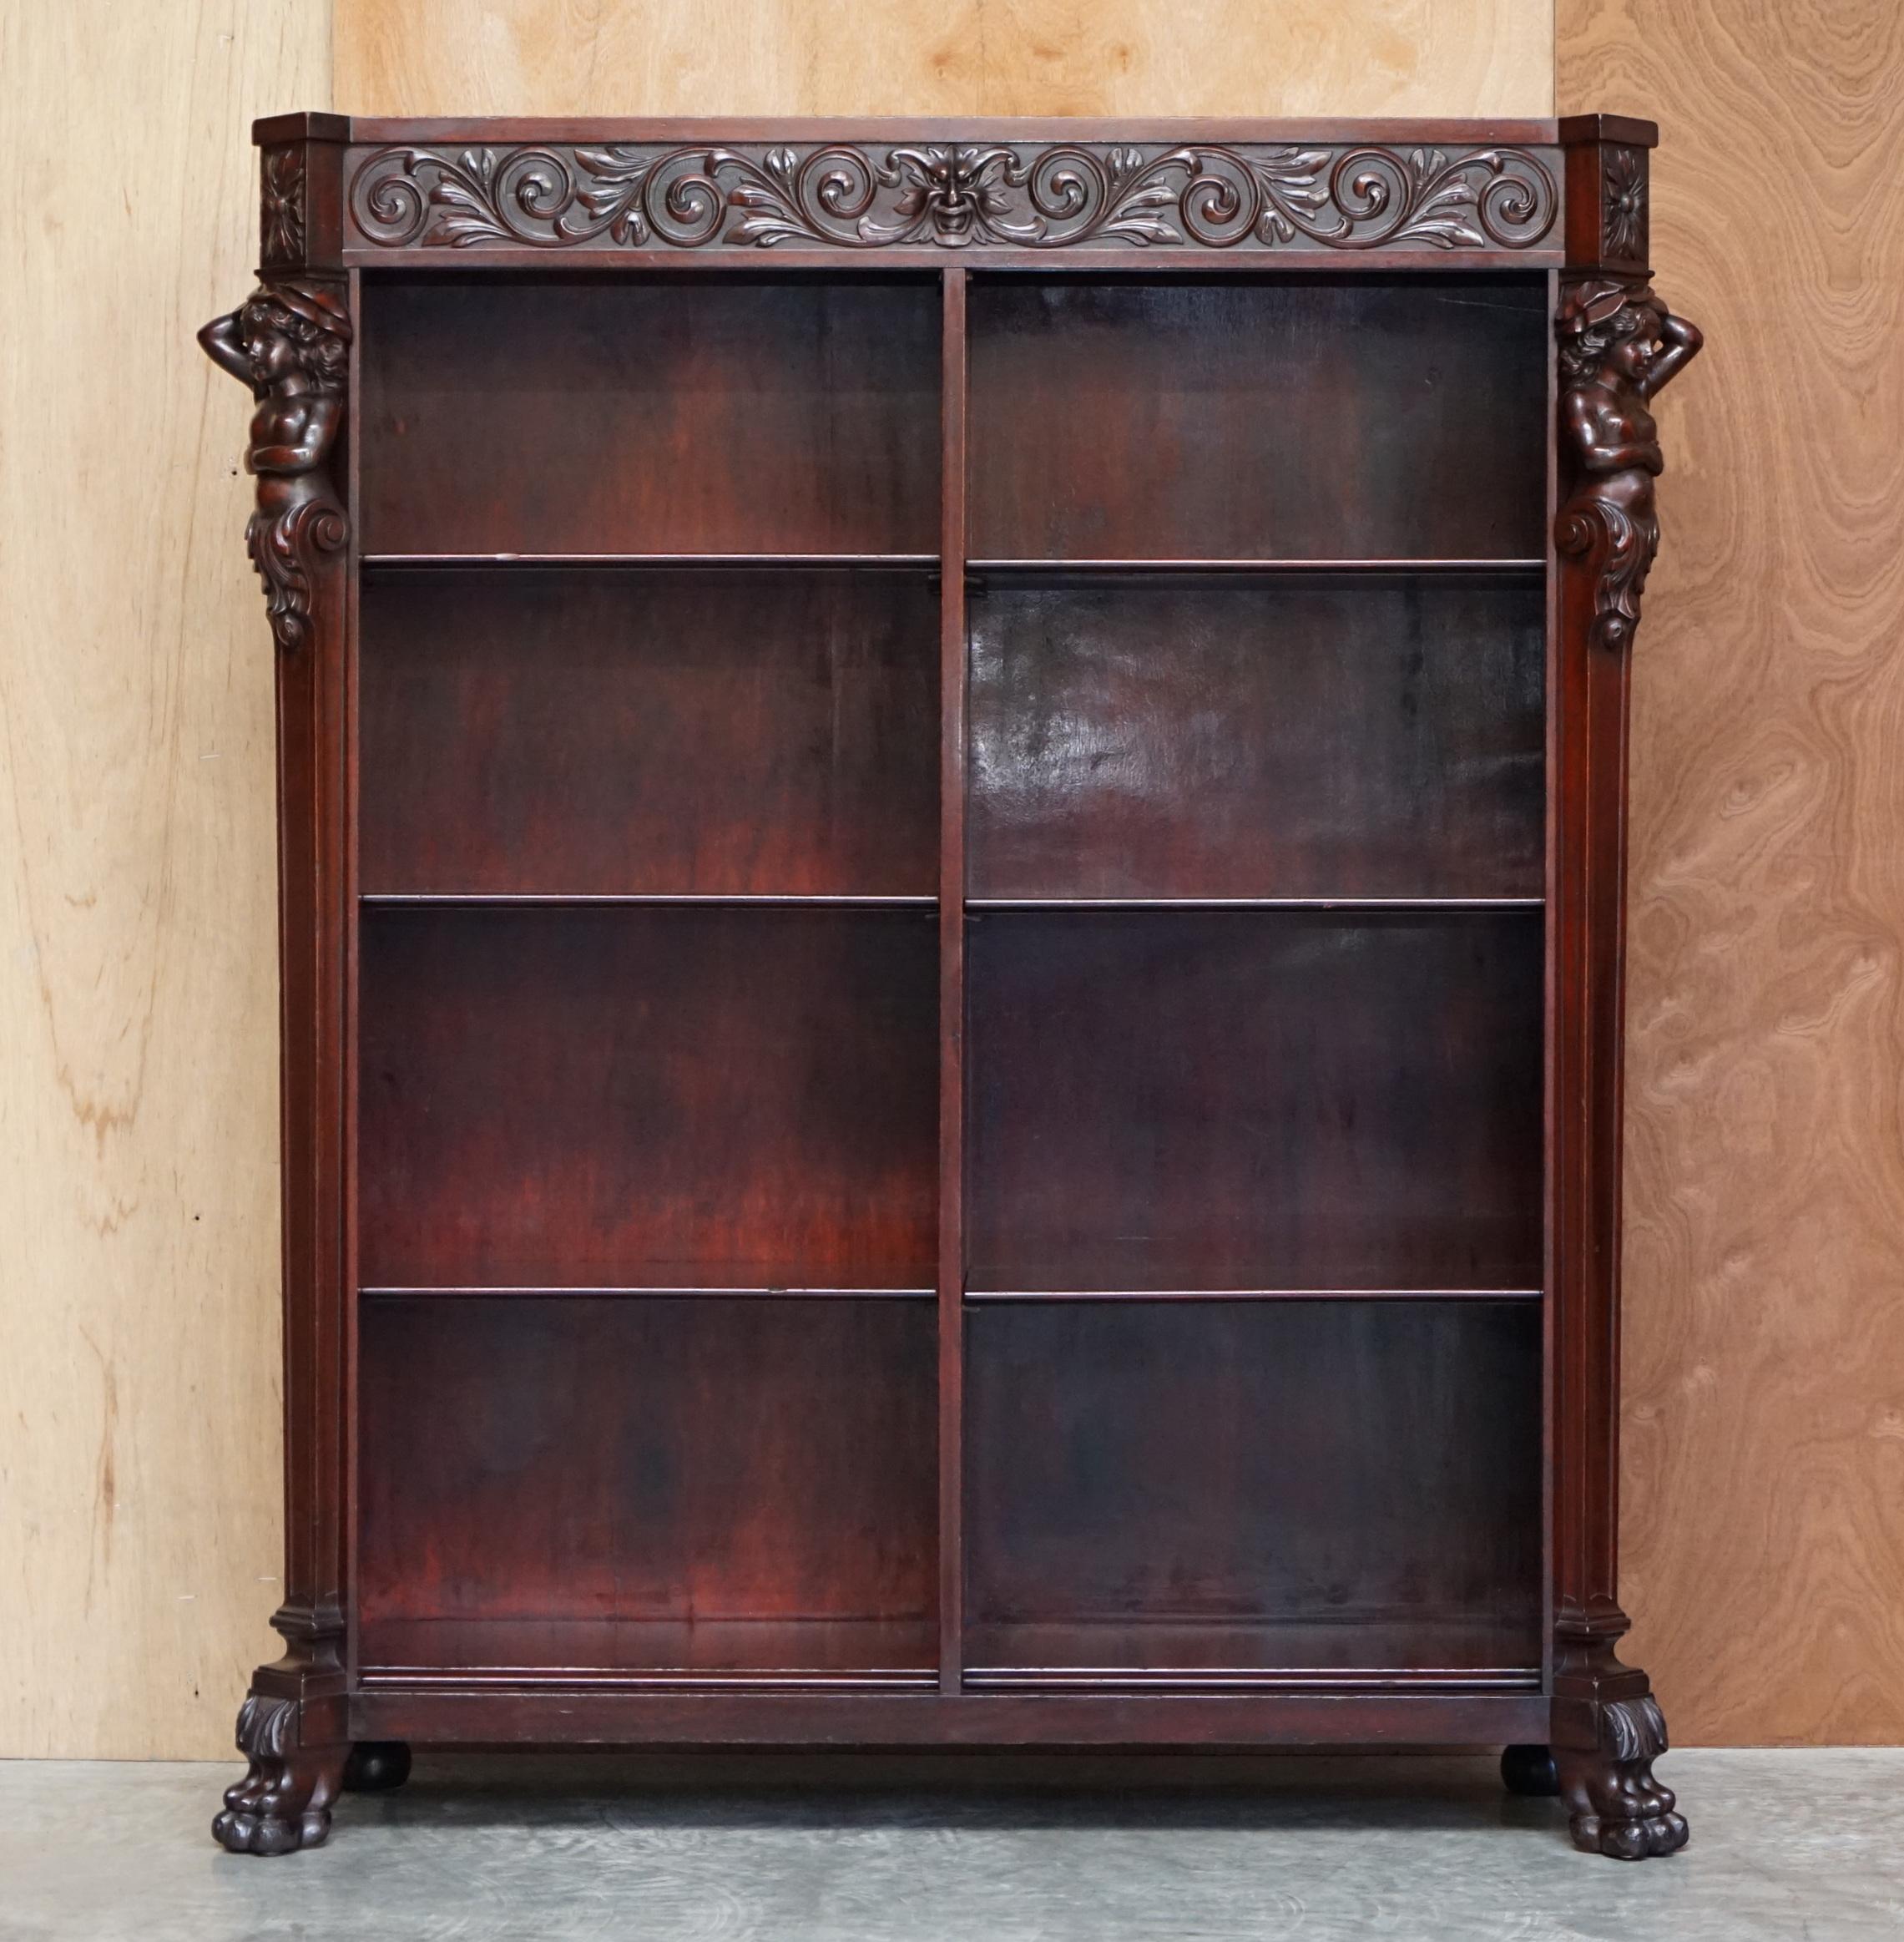 We are delighted to offer this stunning original mahogany library bookcase with herm carved statues and Lion hairy paw feet to the base

A good looking and well made piece, its rare to find one with the ornately carved Herm statues on the sides,